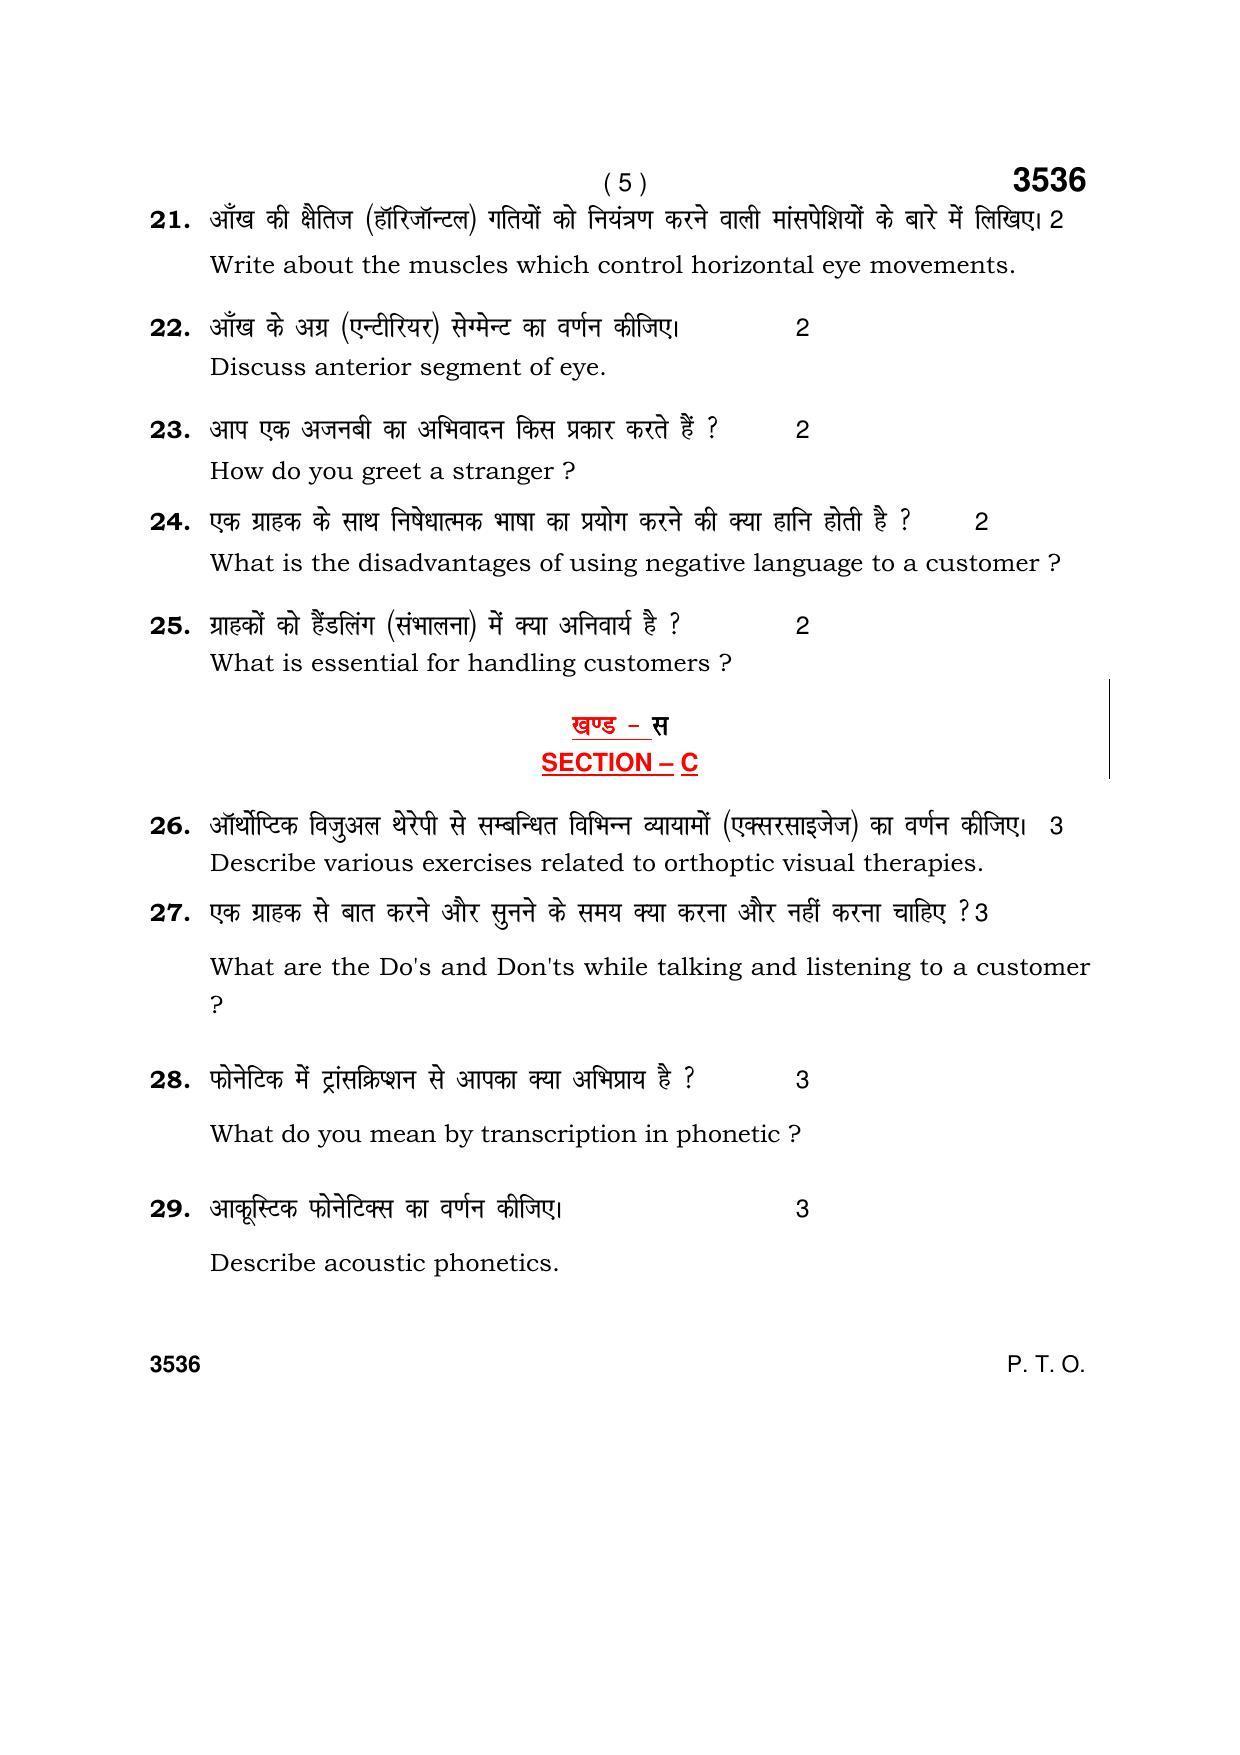 Haryana Board HBSE Class 10 Vision Technician 2018 Question Paper - Page 5